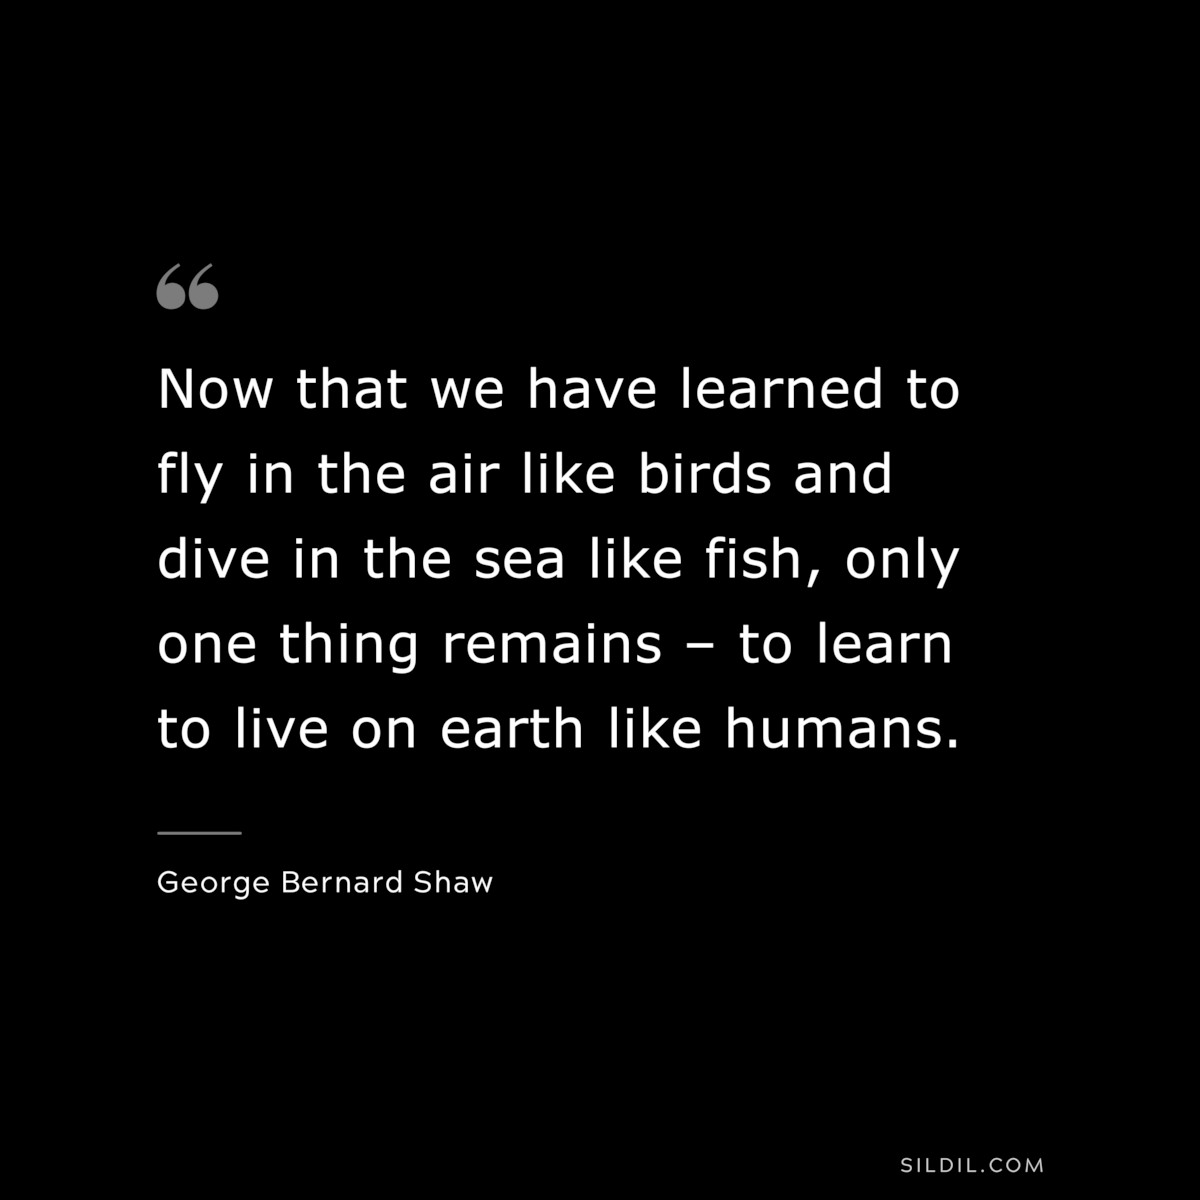 Now that we have learned to fly in the air like birds and dive in the sea like fish, only one thing remains – to learn to live on earth like humans. ― George Bernard Shaw